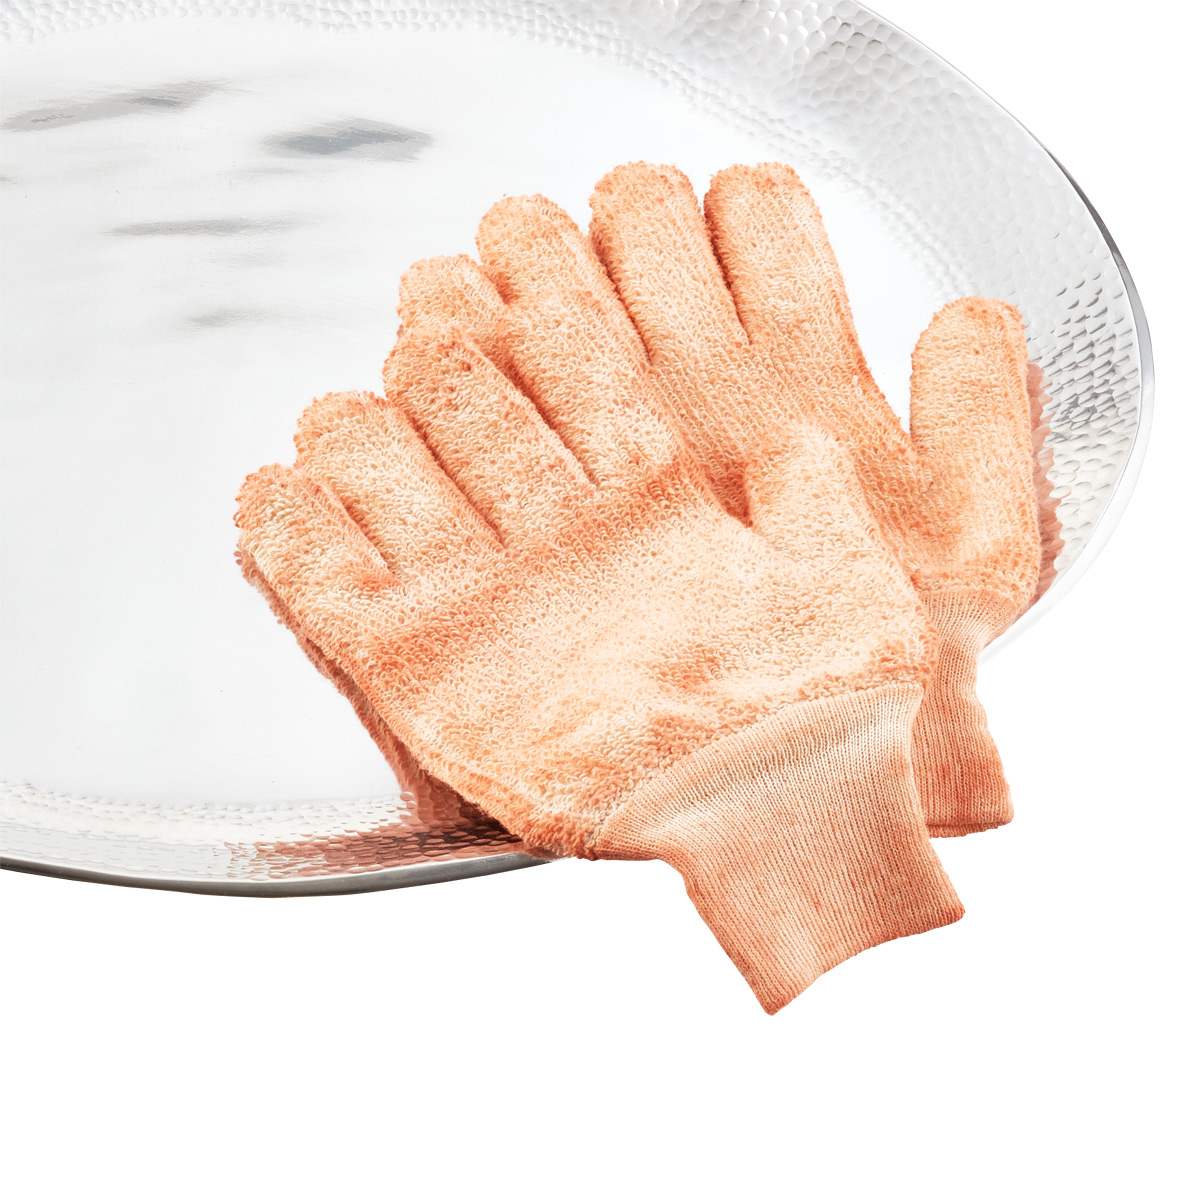 Hagerty Silversmiths' Gloves with R-22 Tarnish Preventative